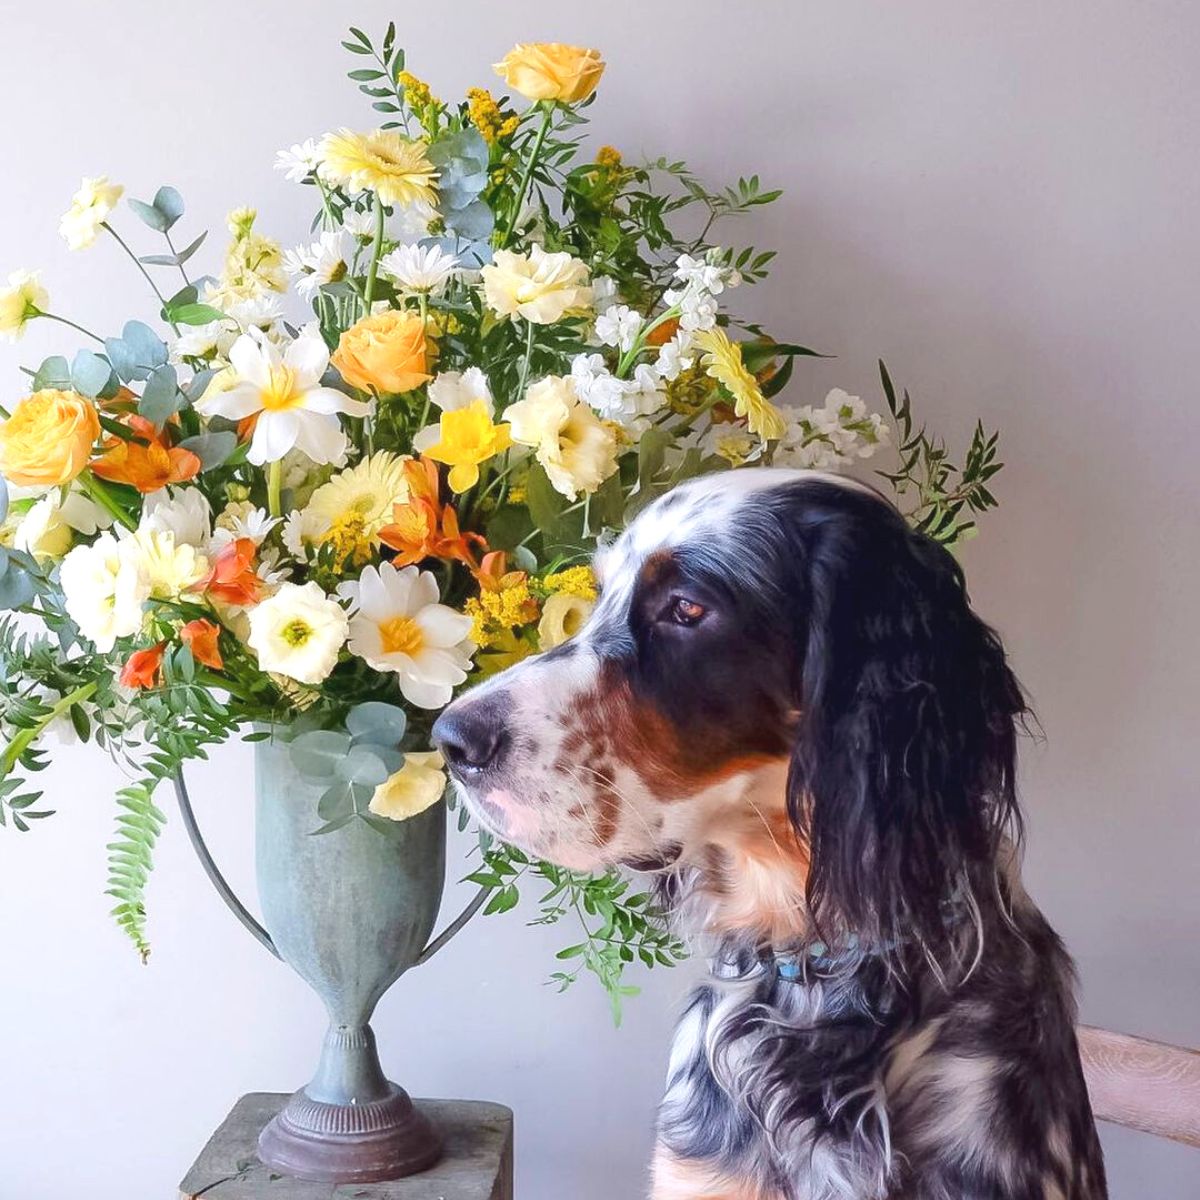 TJ McGrath's dog Chaucer with flowers